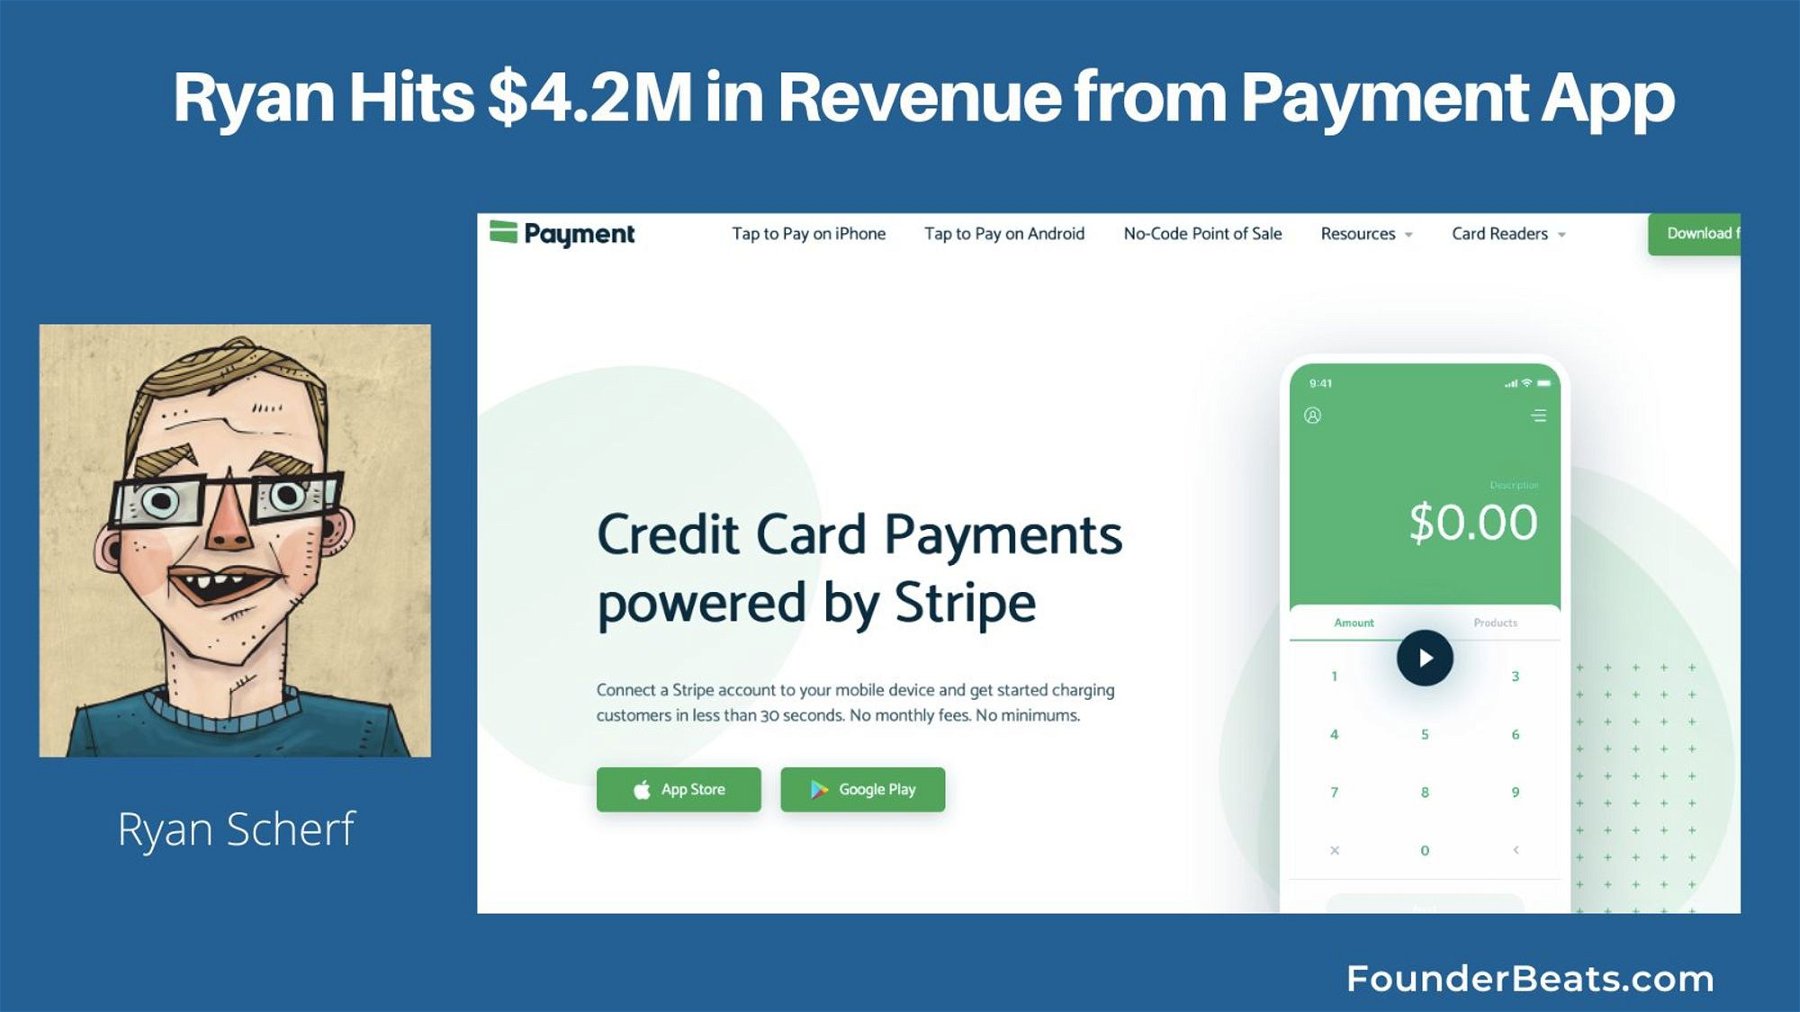 Ryan Hits $4.2M in Revenue from Payment App